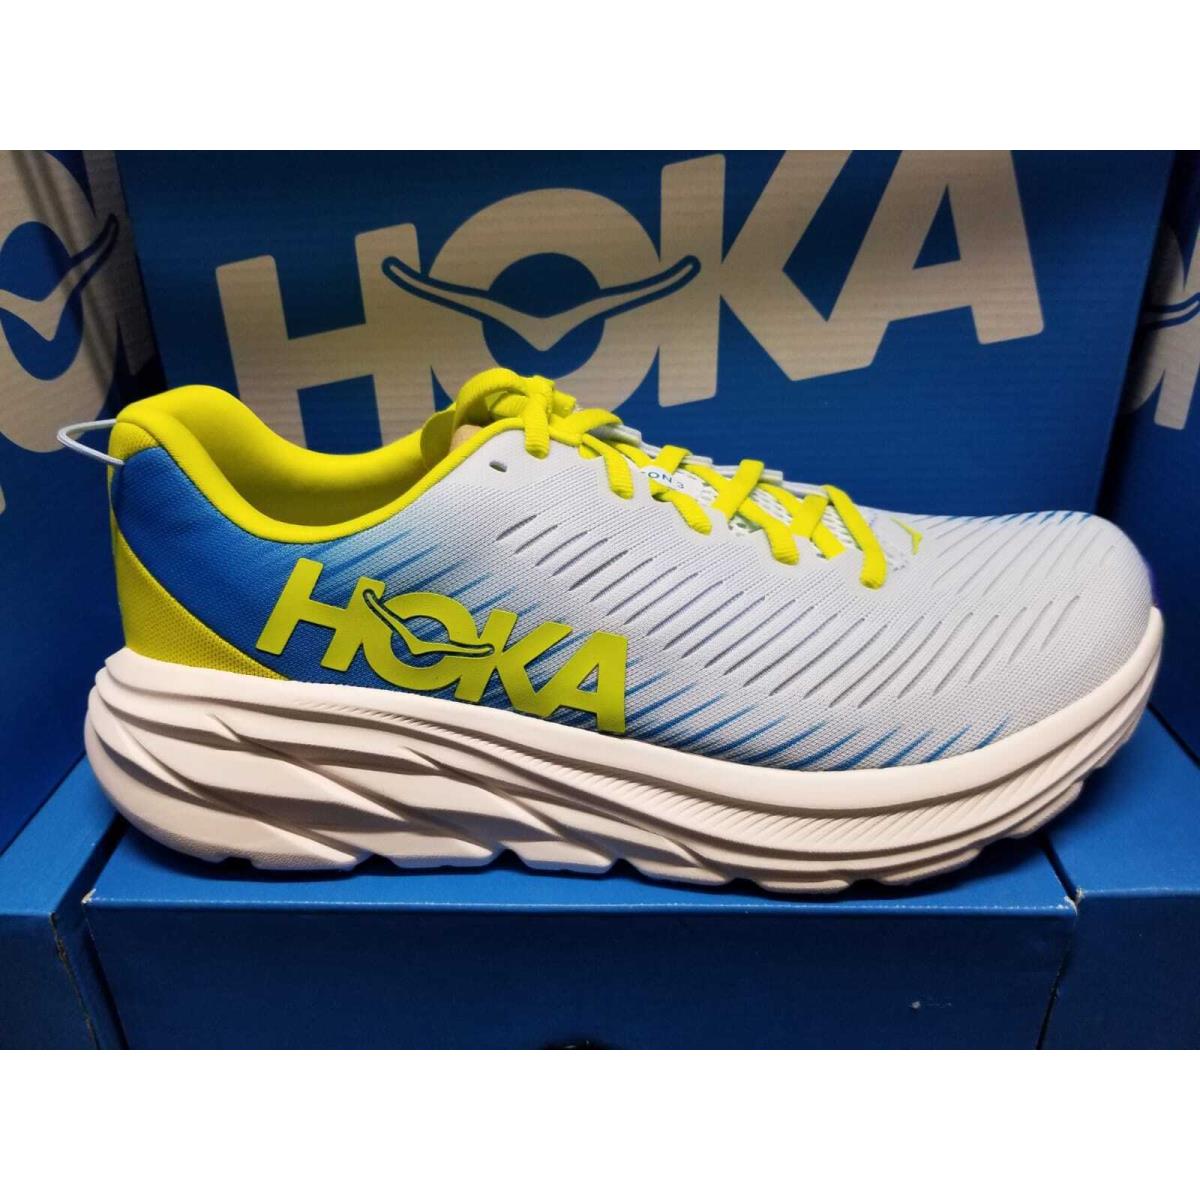 Rincon 3 Hoka One One Ice Water/diva Blue Iwdb 1119395 D Men`s Shoes